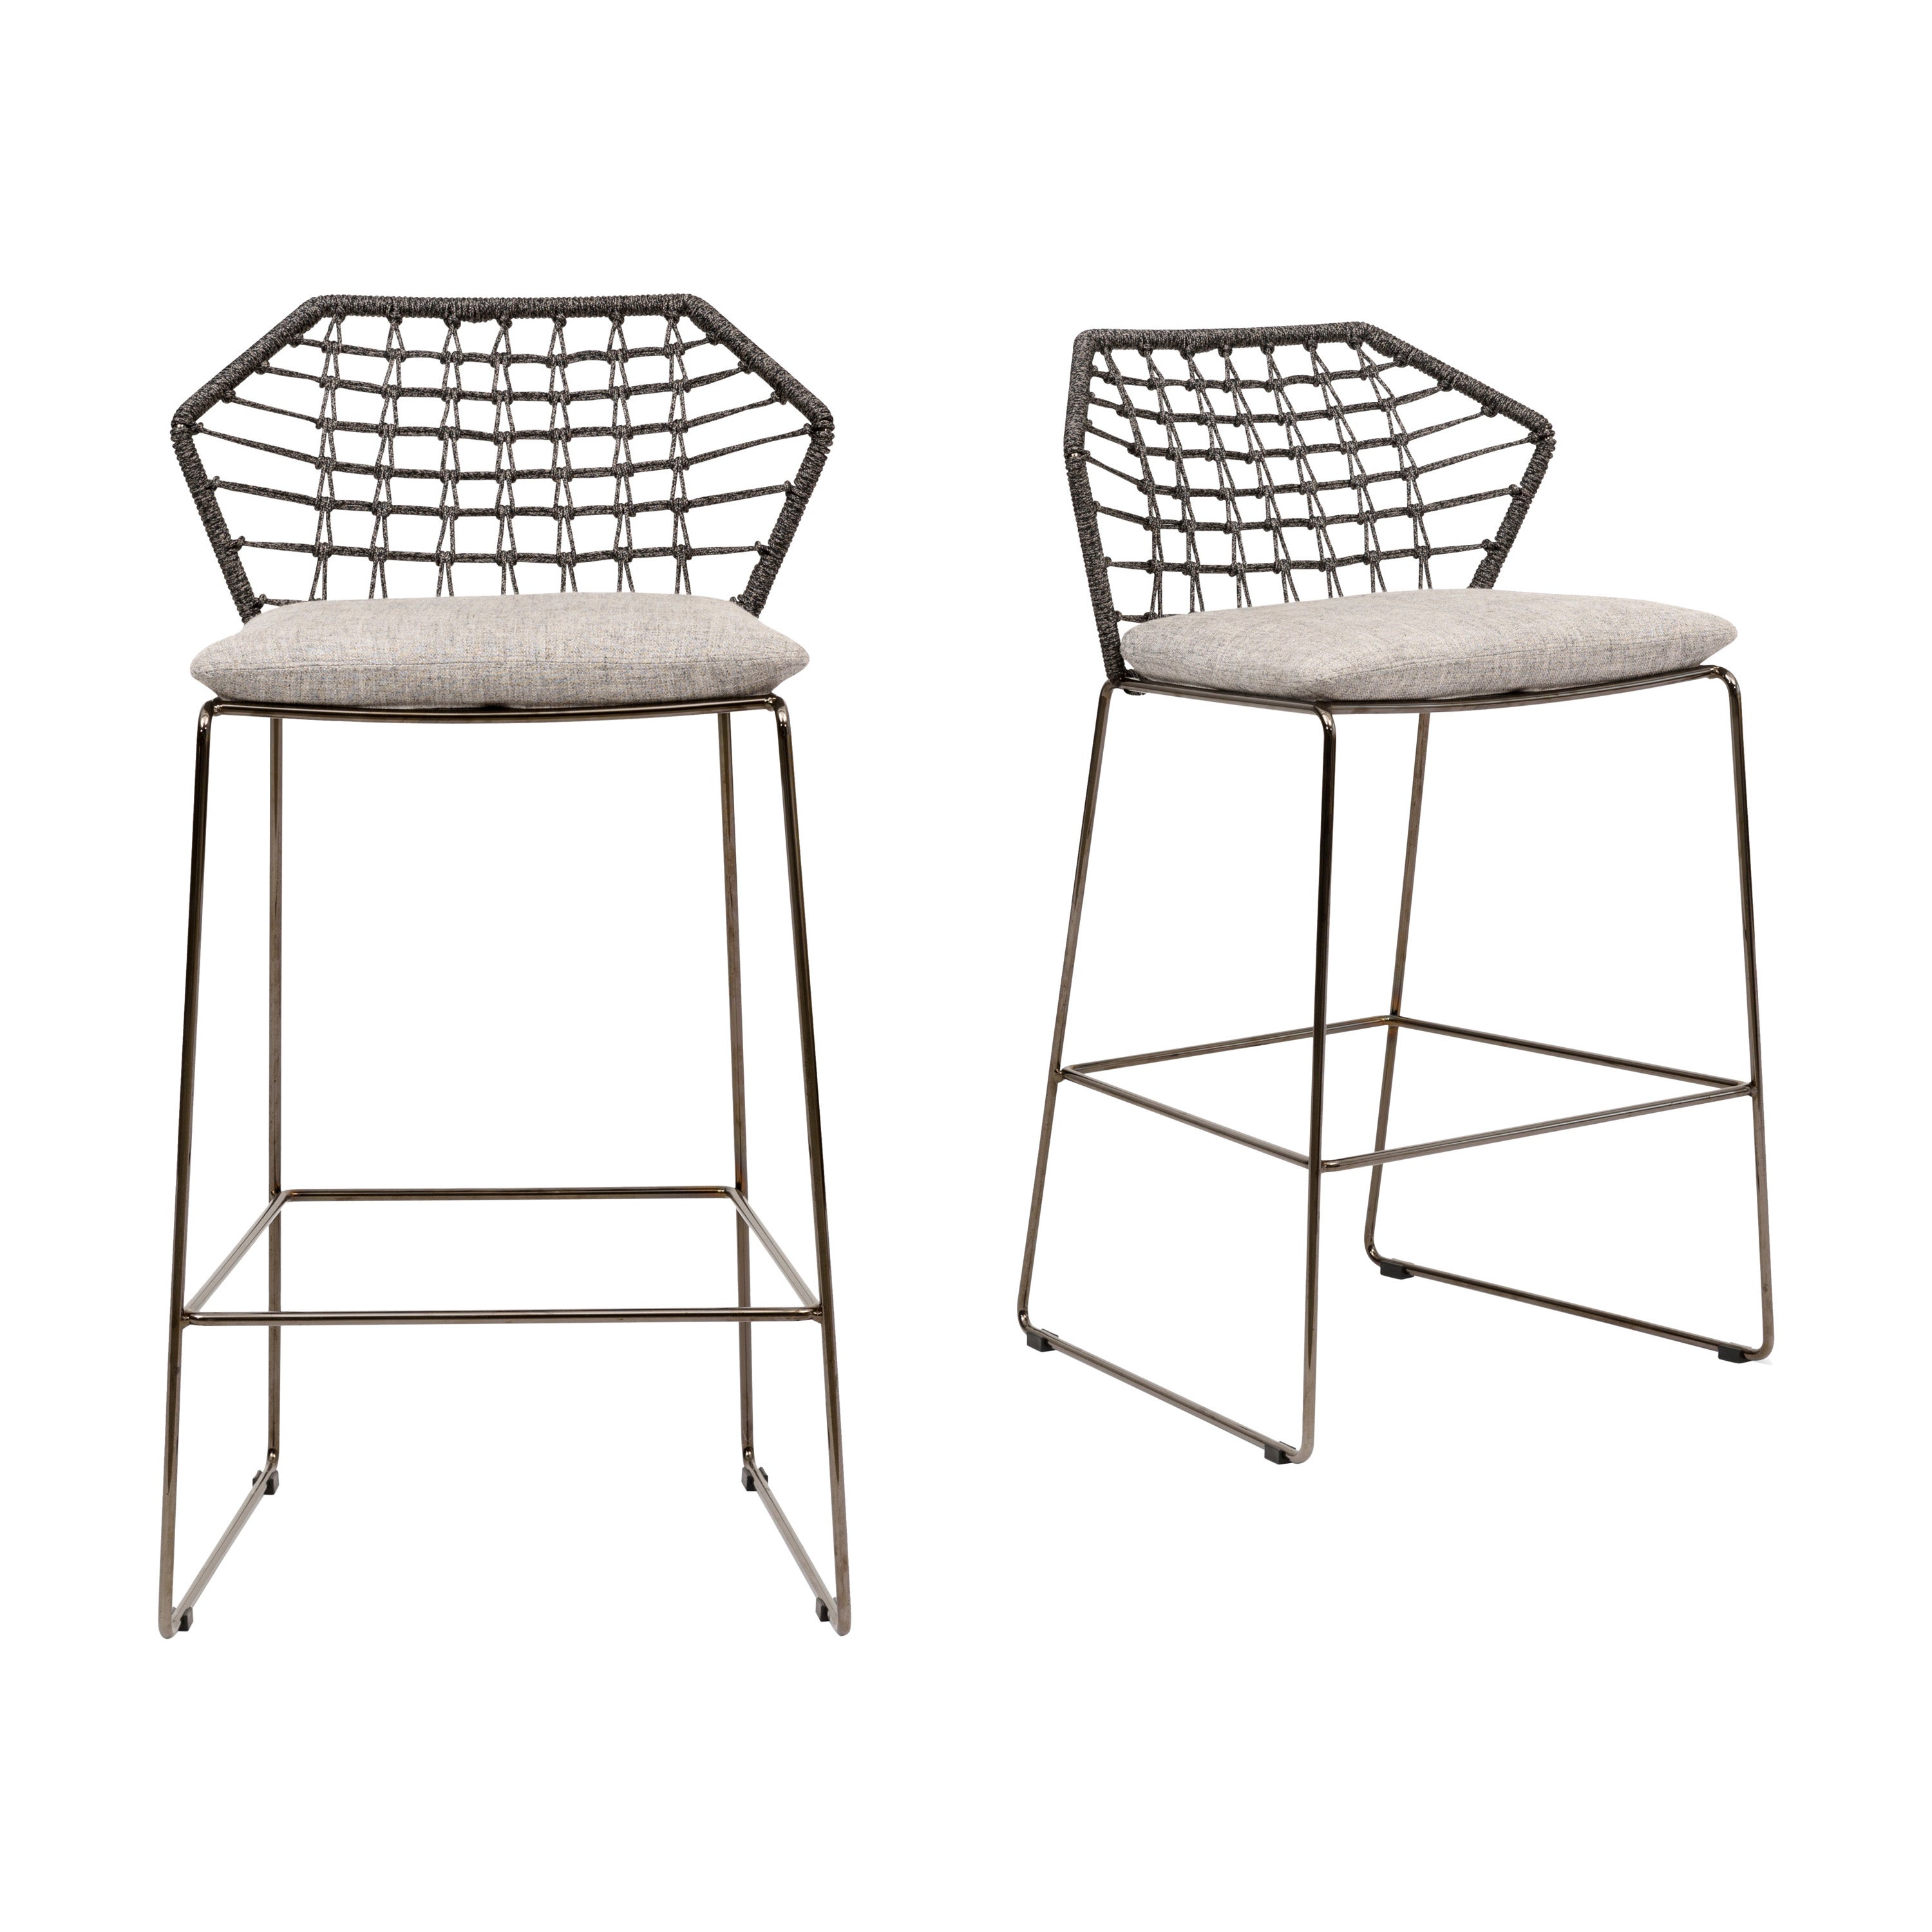 New York Soleil High Stool with Grey Rope Frame & Black Legs by Sergio Bicego